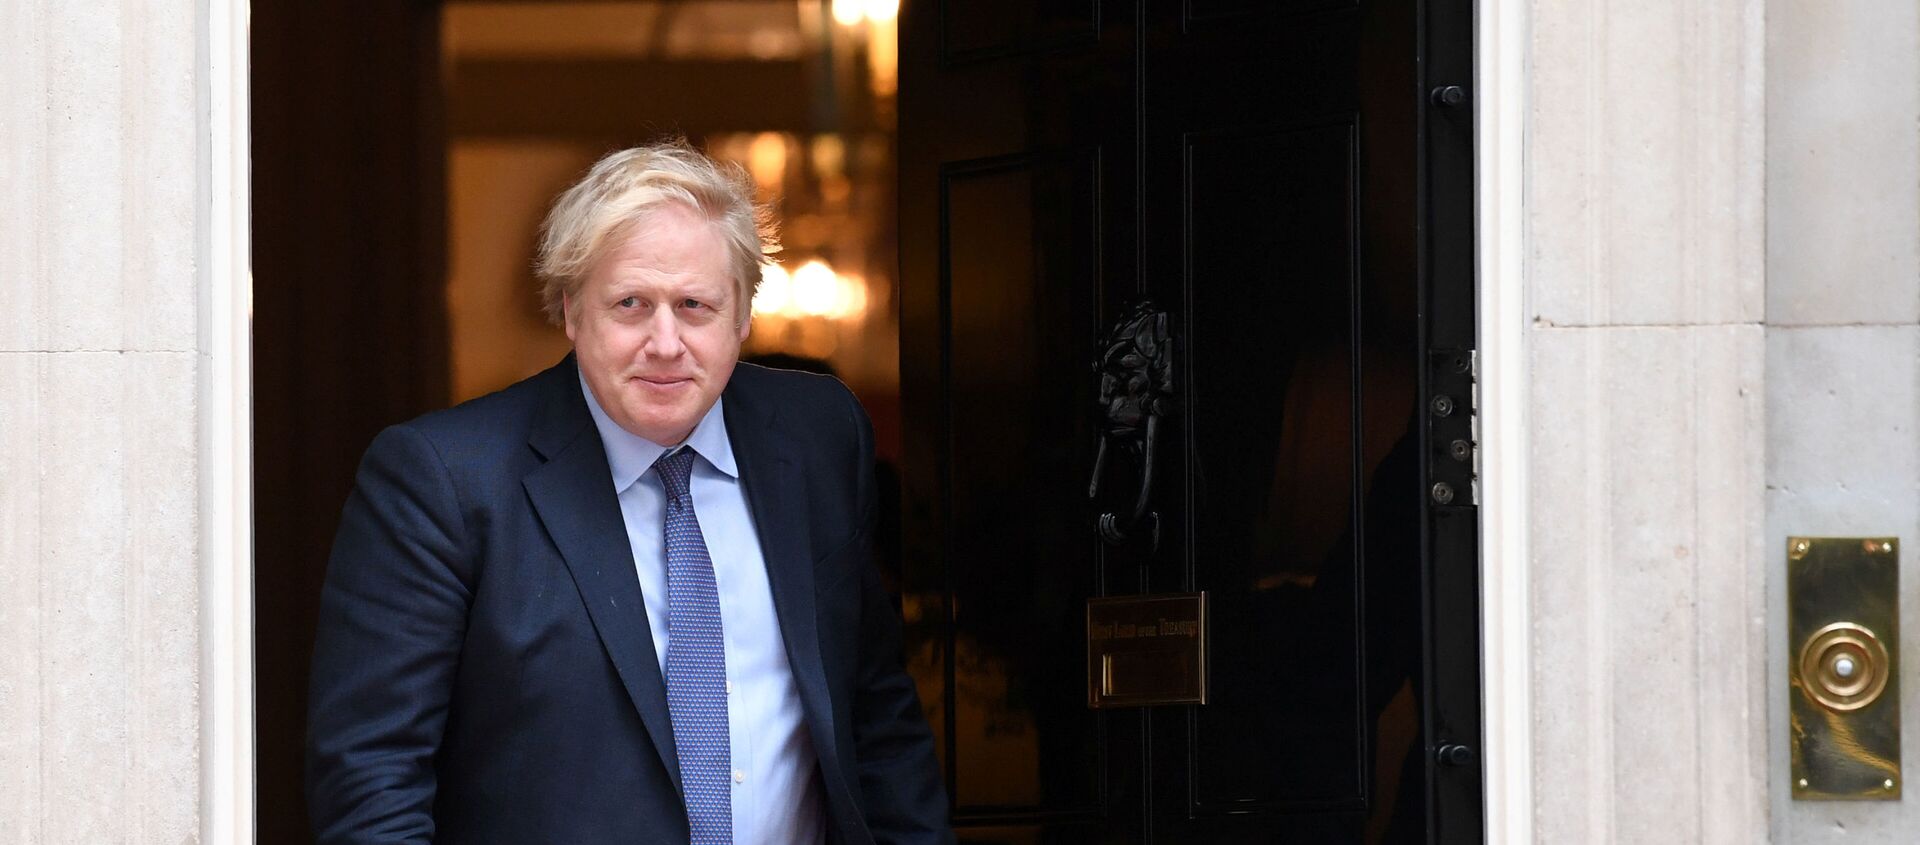 Britain's Prime Minister Boris Johnson goes out to welcome the Sultan of Brunei, Hassanal Bolkiah (not pictured), at Downing Street in London, Britain, February 4, 2020. Stefan Rousseau/Pool via REUTERS - Sputnik International, 1920, 13.02.2020